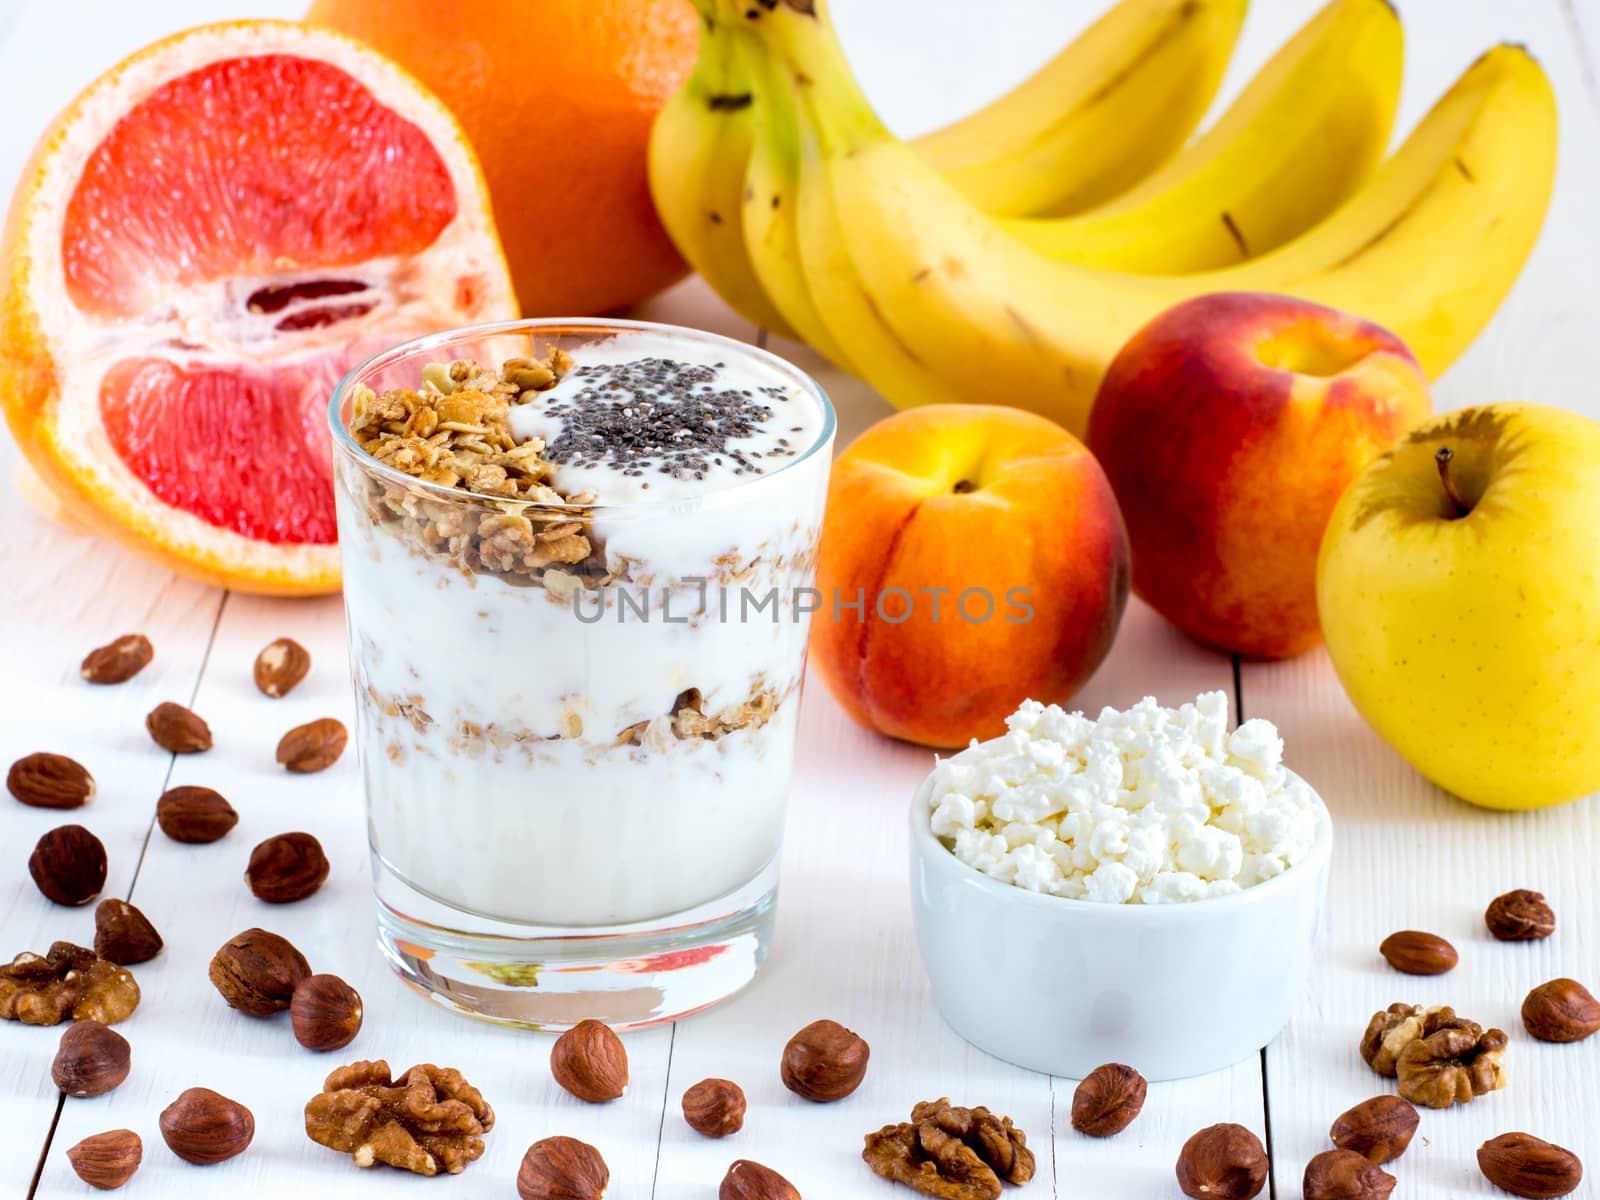 dieting cottage cheese and yogurt, with fresh fruits and nuts by fascinadora